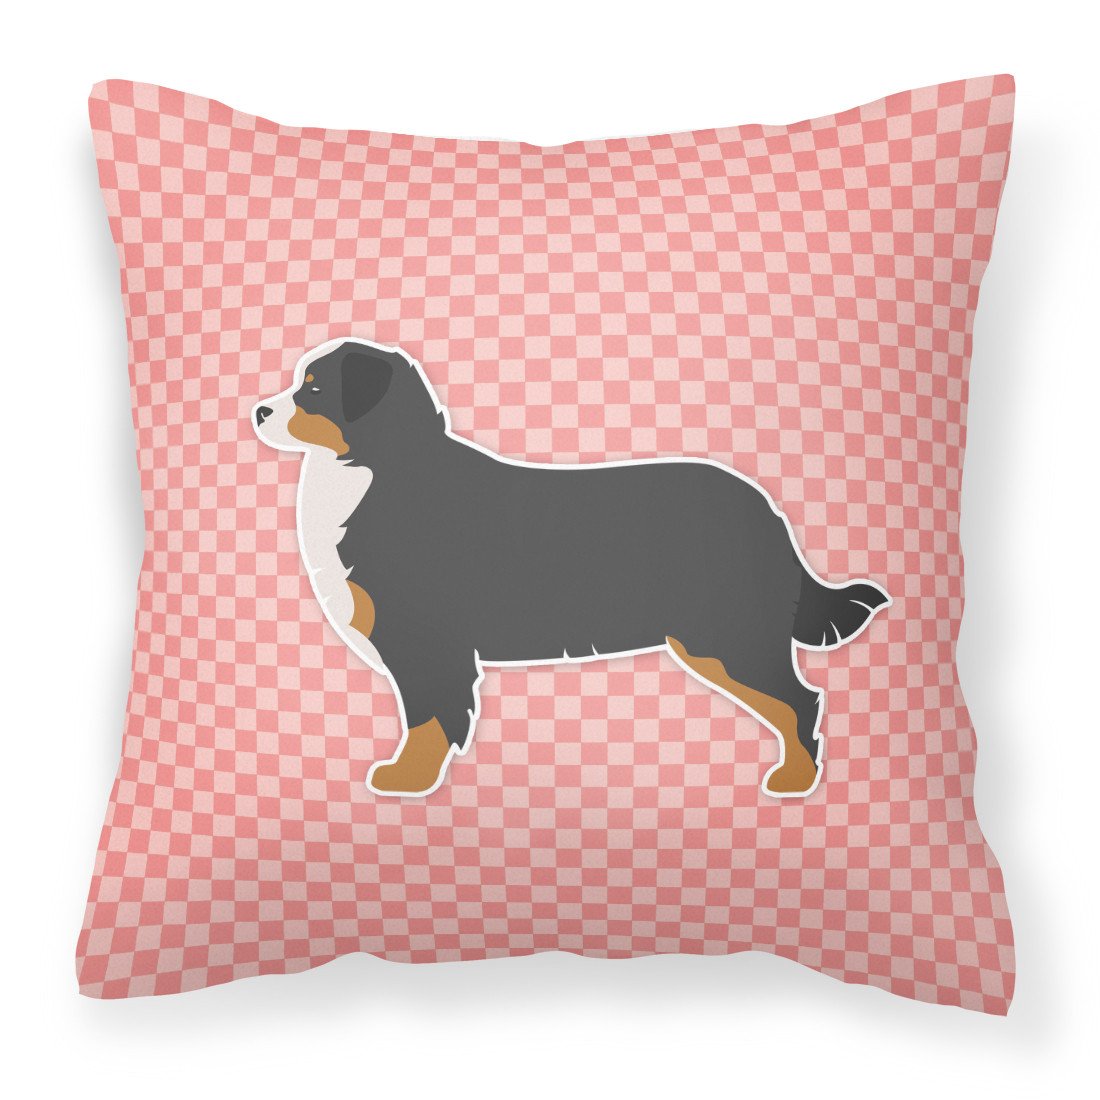 Bernese Mountain Dog Checkerboard Pink Fabric Decorative Pillow BB3619PW1818 by Caroline's Treasures